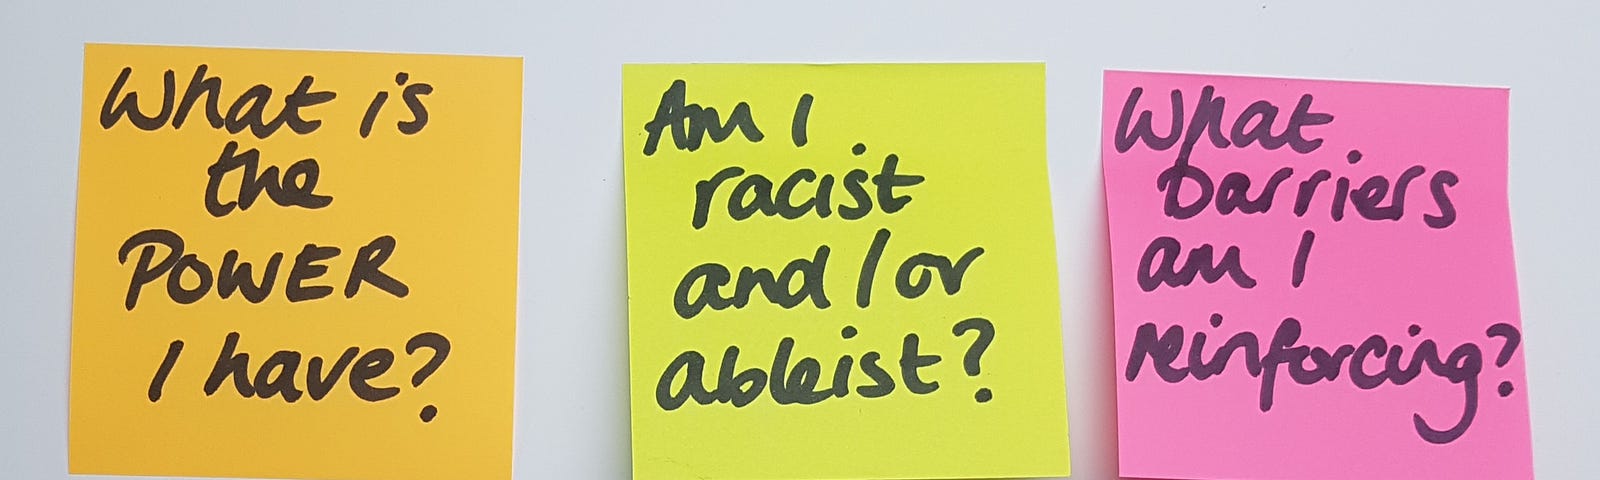 Three different coloured post-it notes with questions: ‘What is the POWER I have?’, ‘Am i racist and/or ableist?’, ‘What barriers am I reinforcing?’